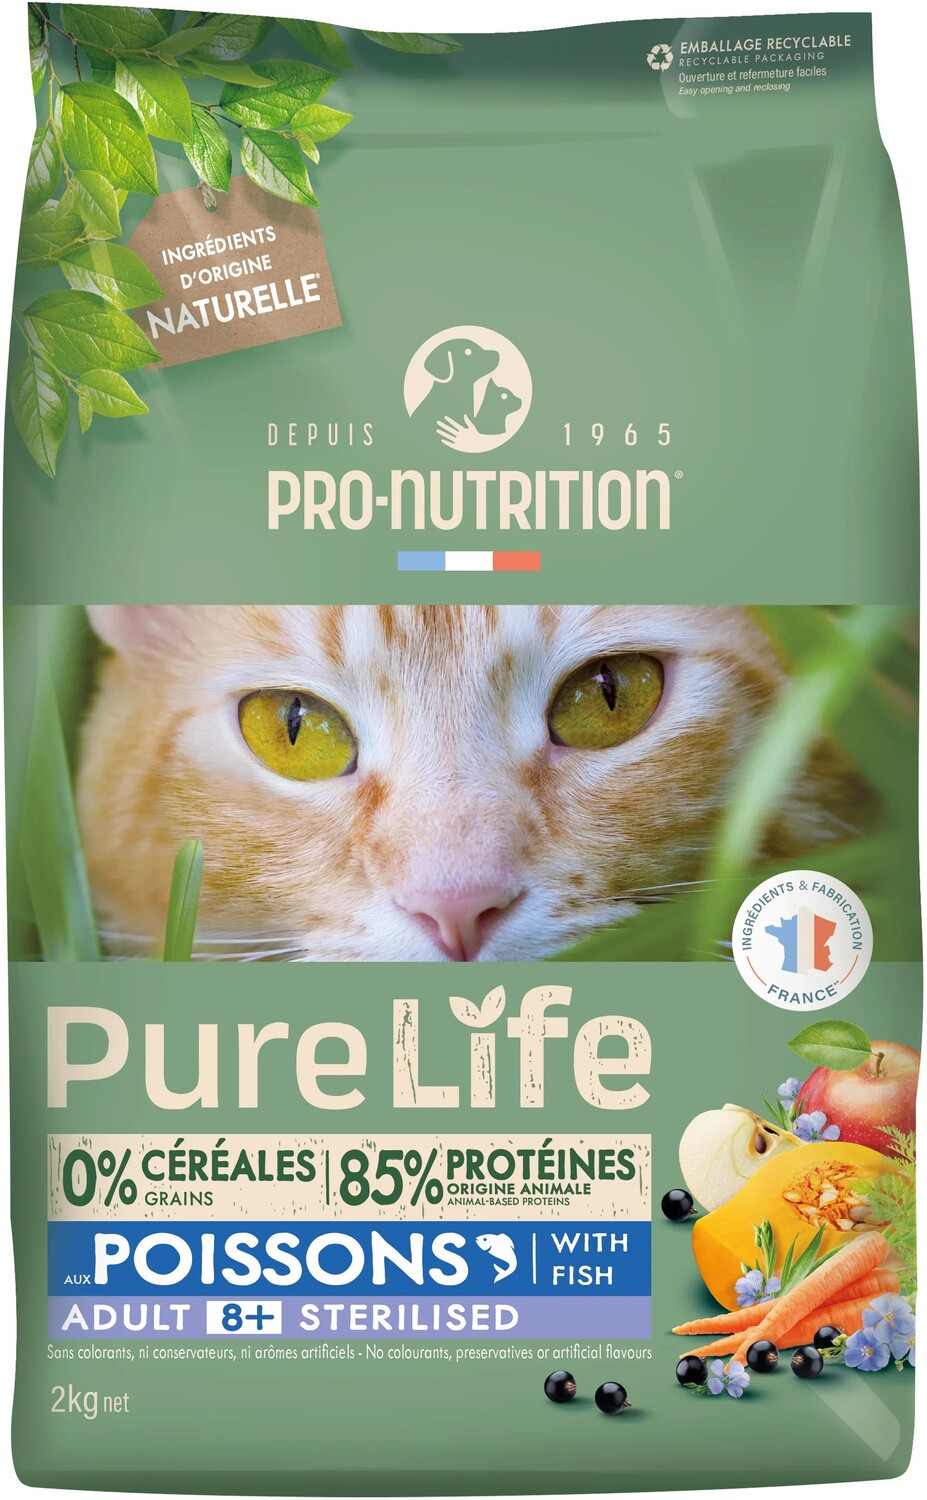 Pro-Nutrition Pure Life Adult 8+ Sterilised aux Poissons with Fish - zoom